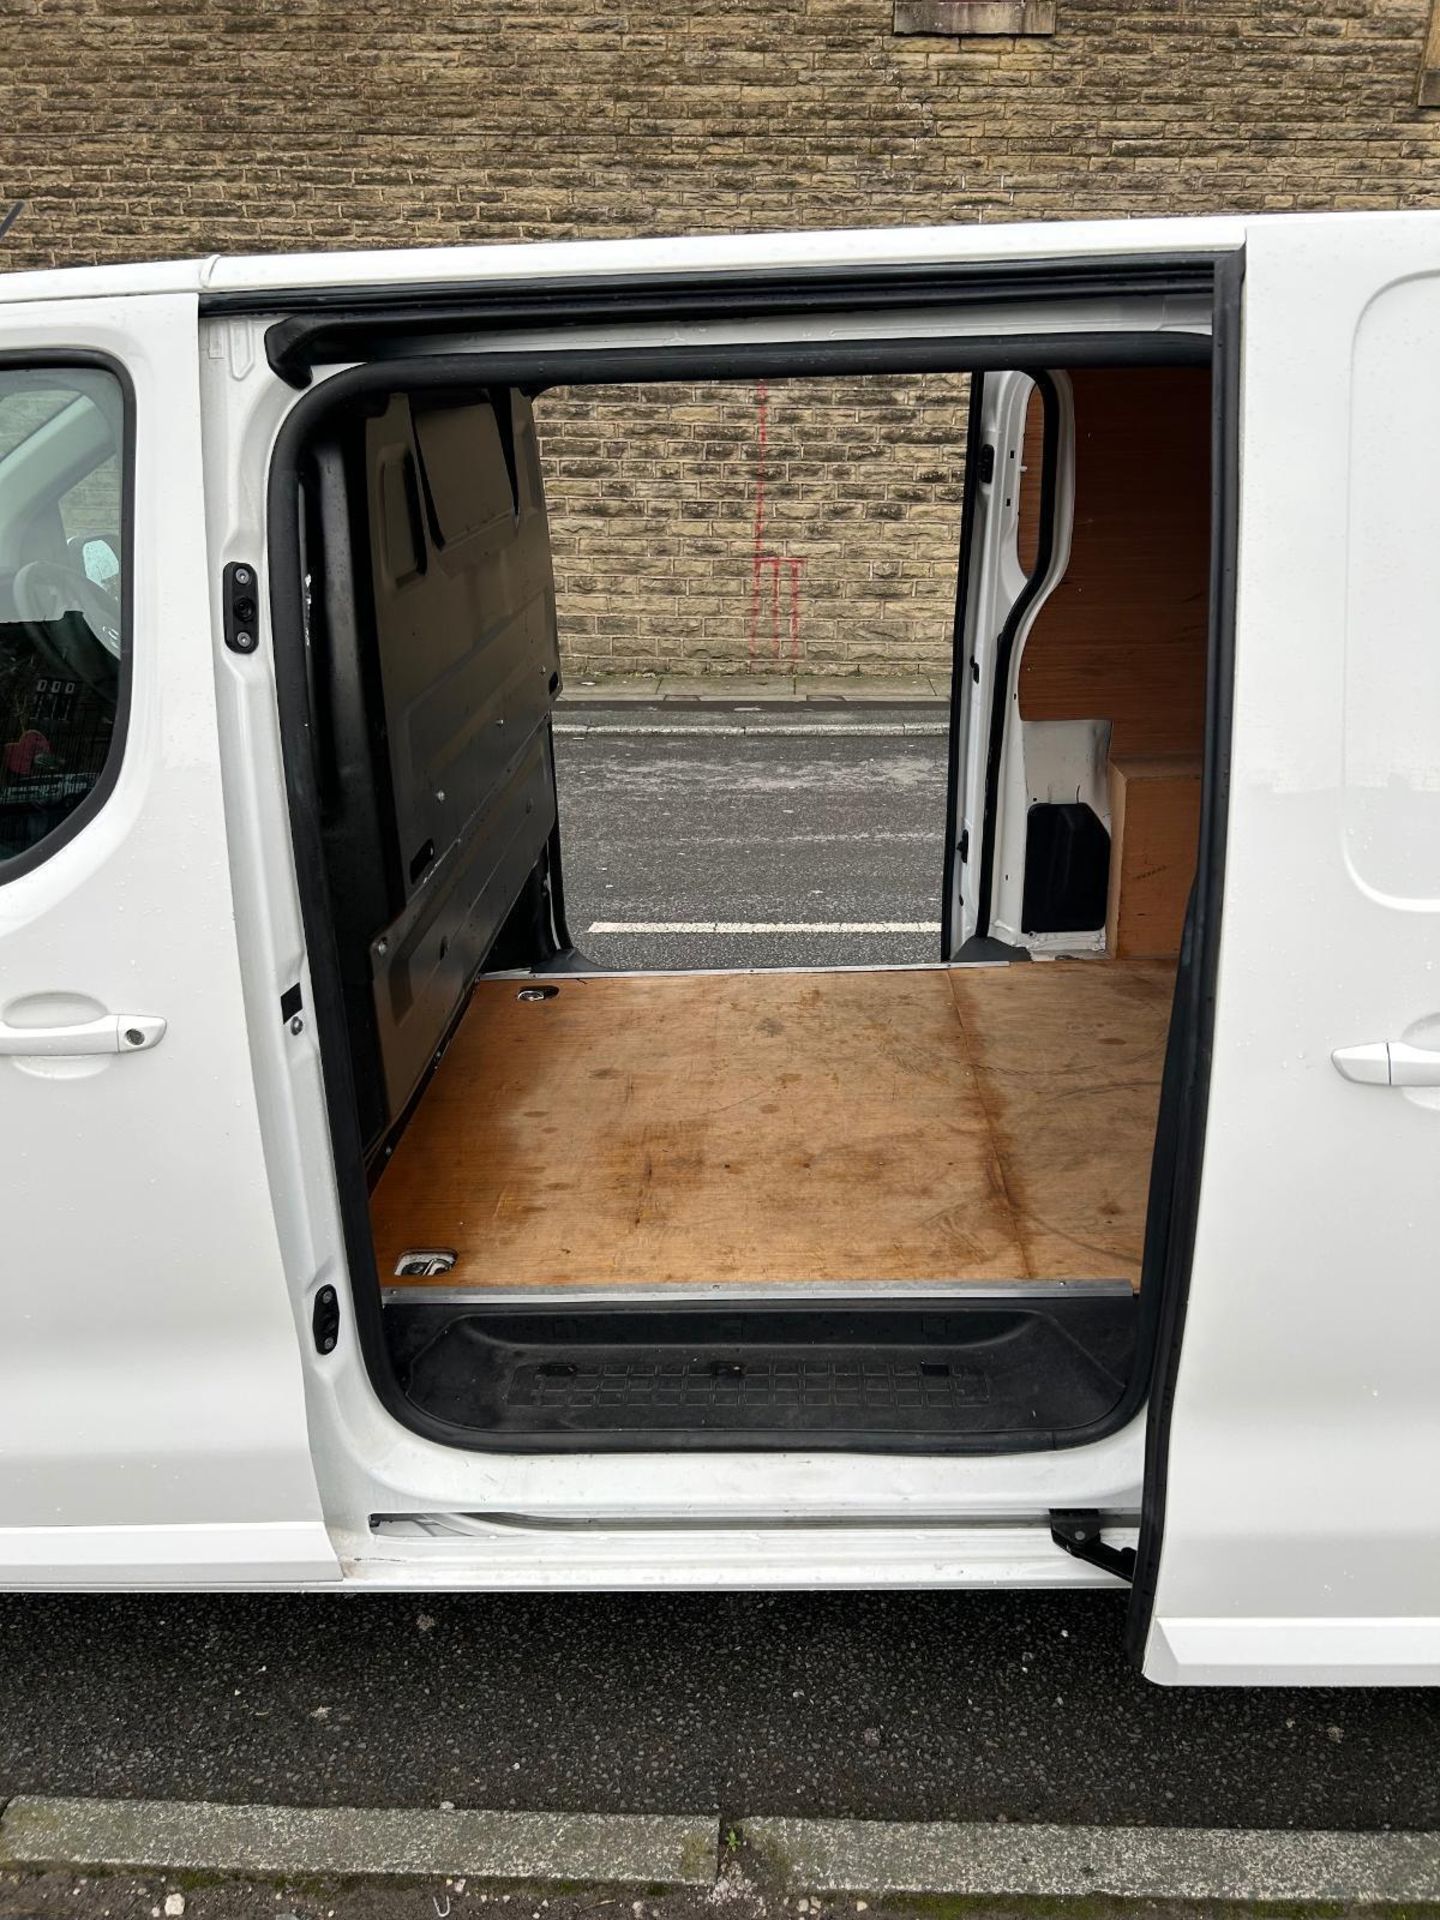 2021 VAUXHALL VIVARO SPORTIVE 24K MILES ONLY - READY FOR WORK! - Image 8 of 12